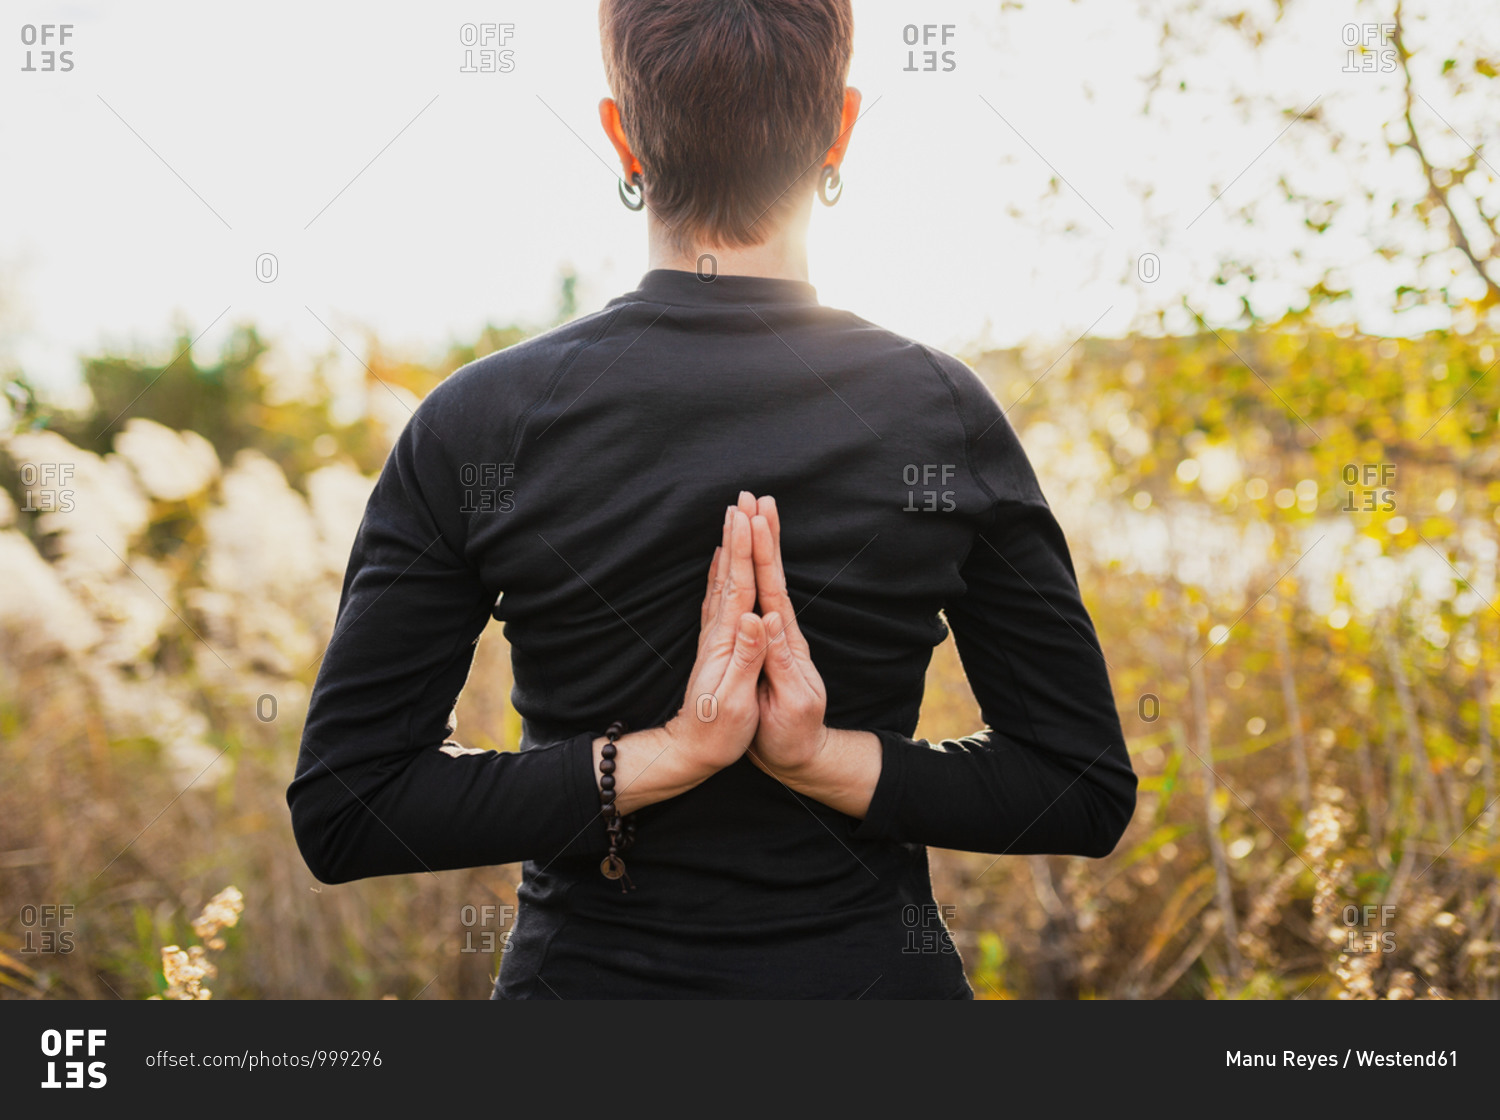 Woman practicing reverse prayer position while standing outdoors